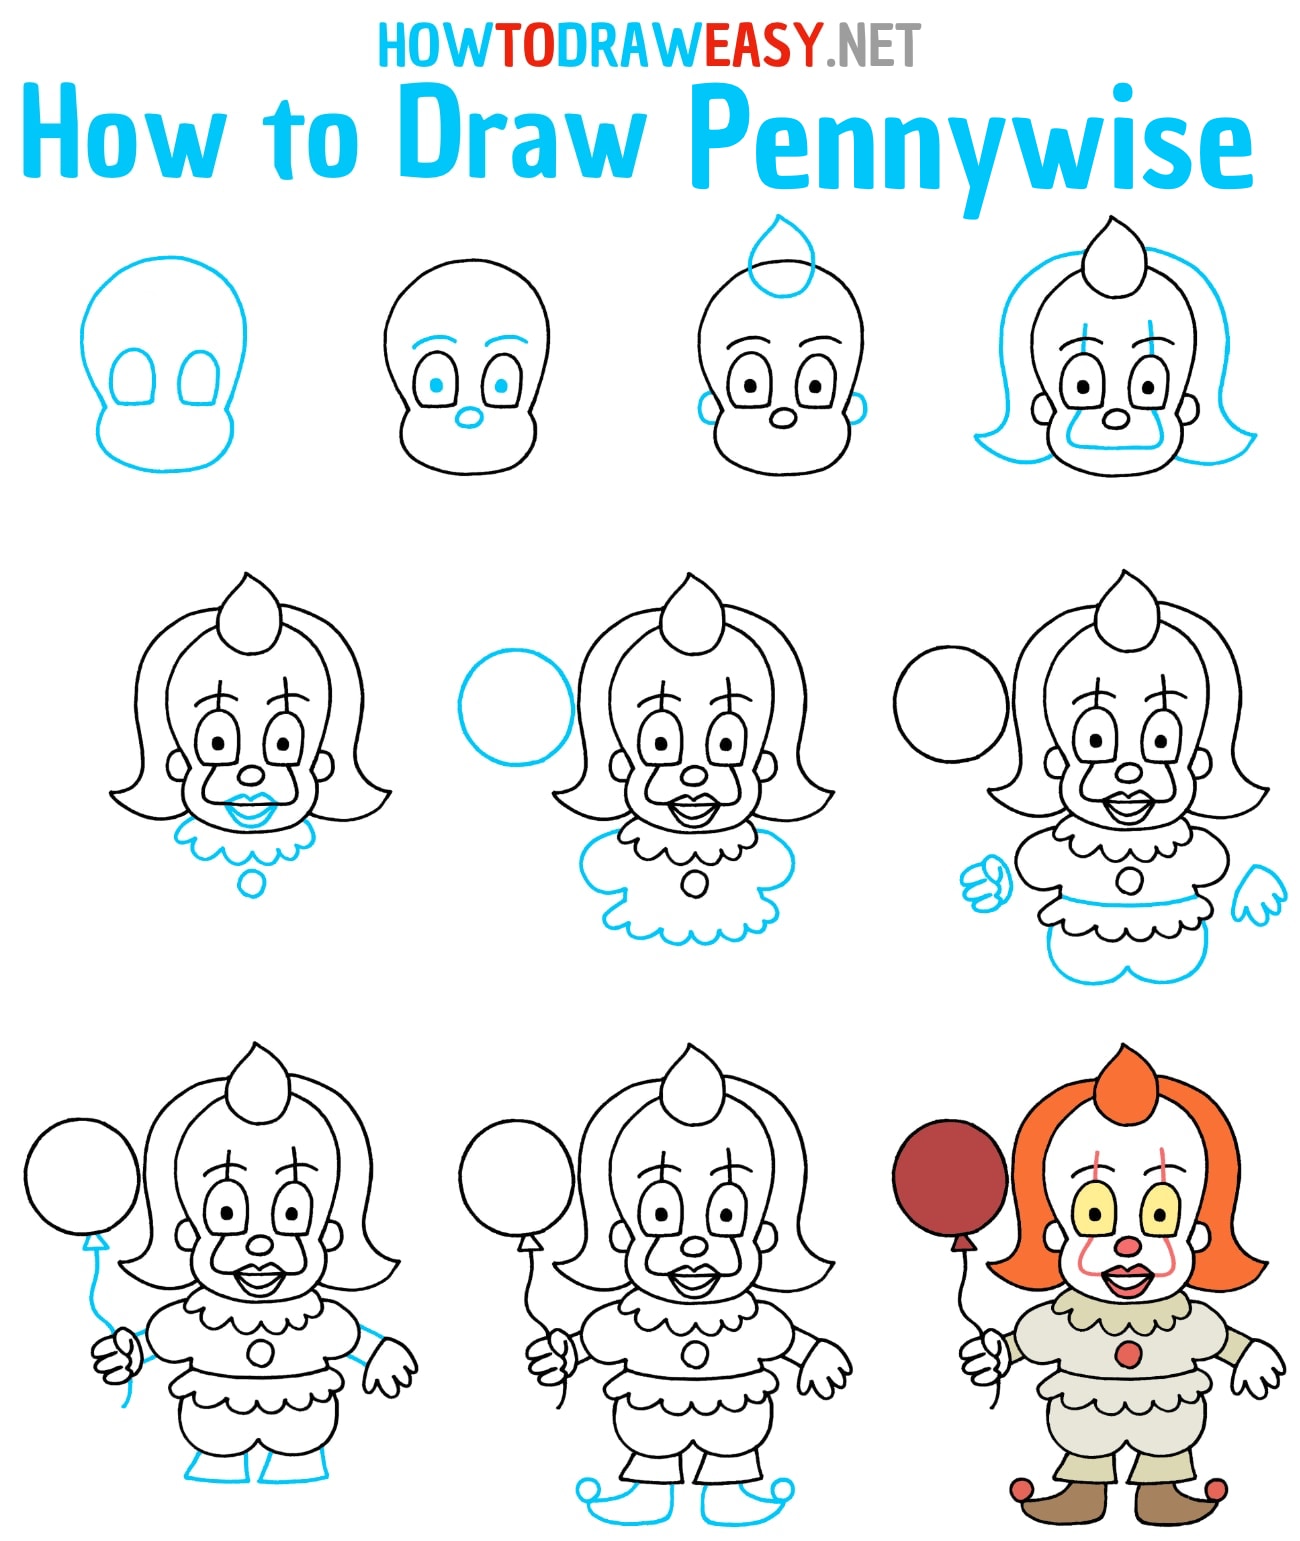 How to Draw Pennywise Step by Step